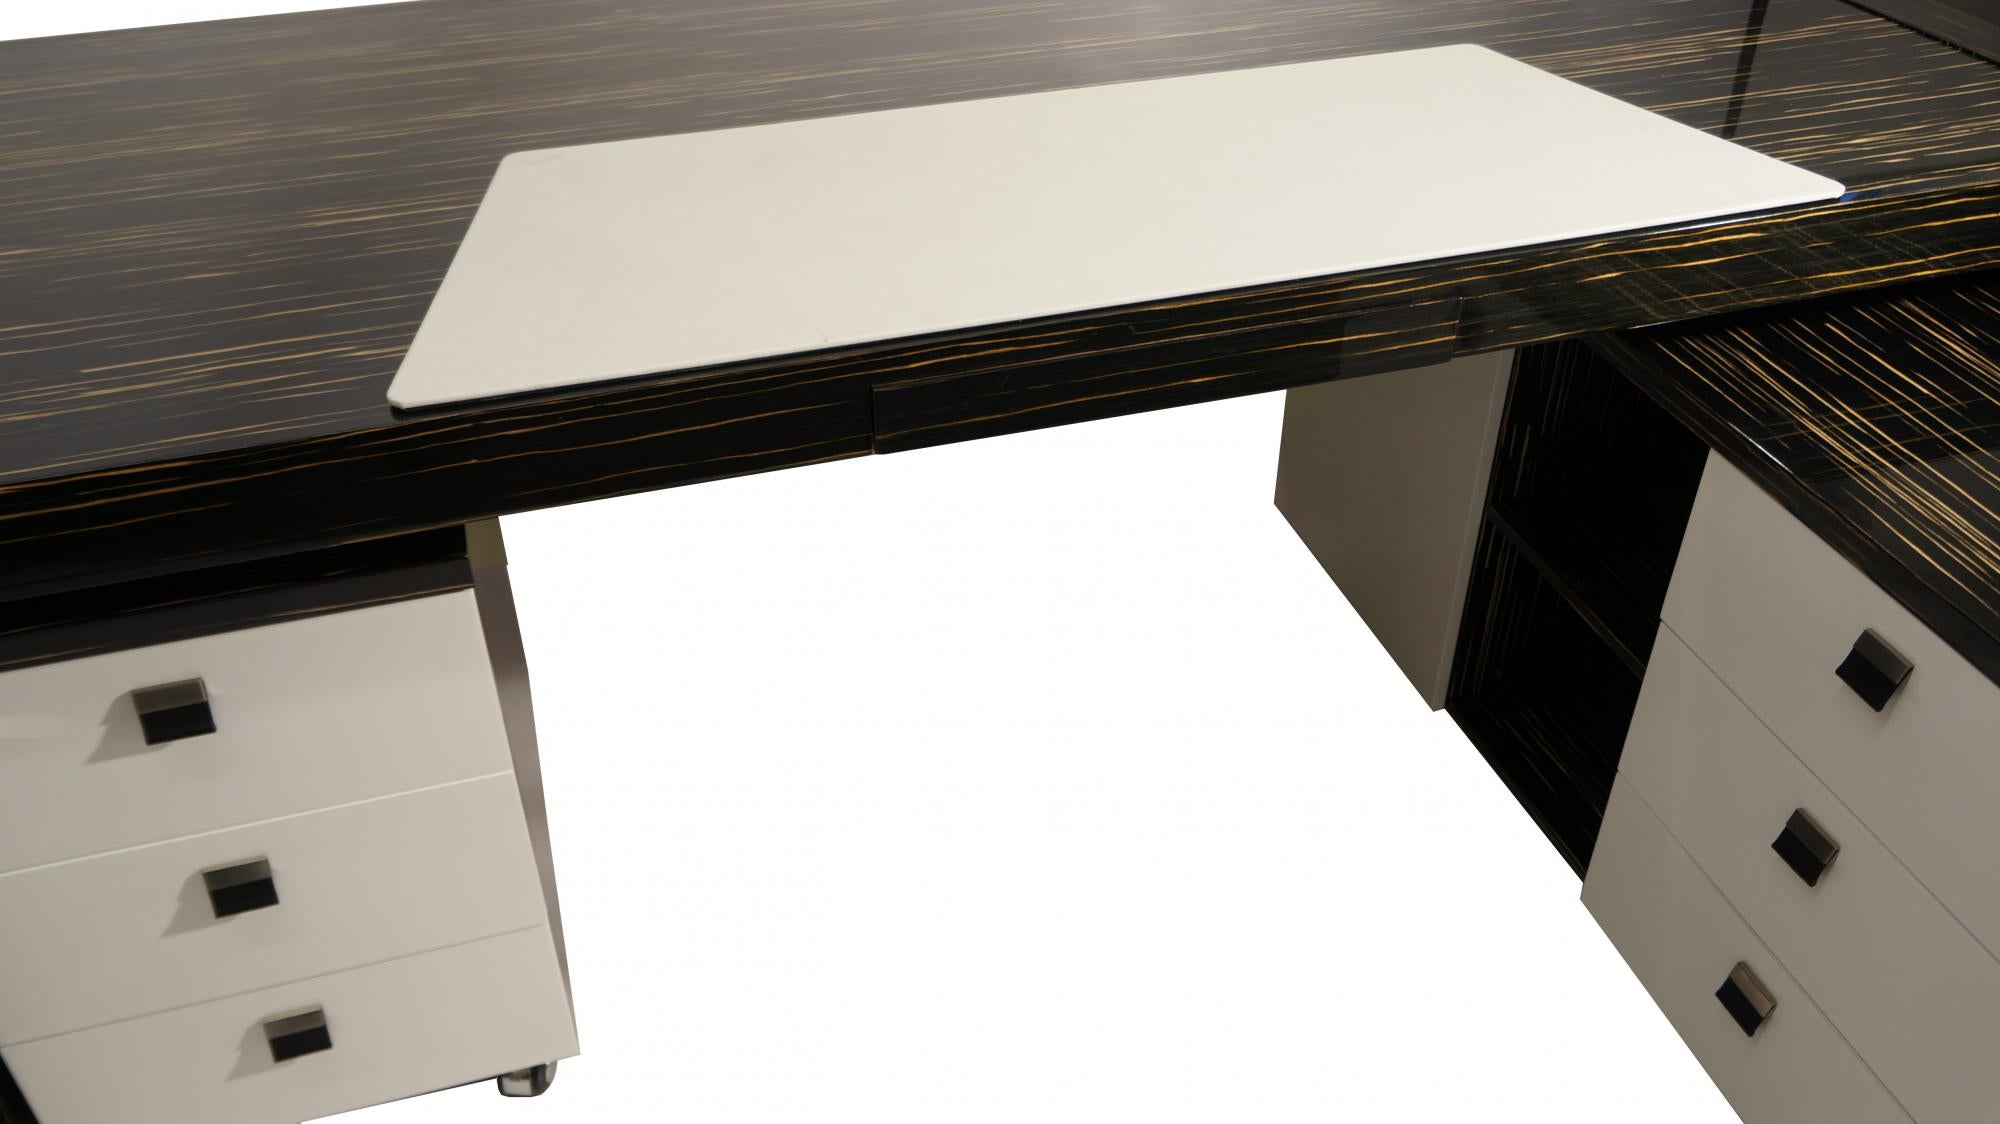 Contemporary High Gloss Black Zebrano Executive Office Desk with Pedestal and Return - 2000mm - 6852